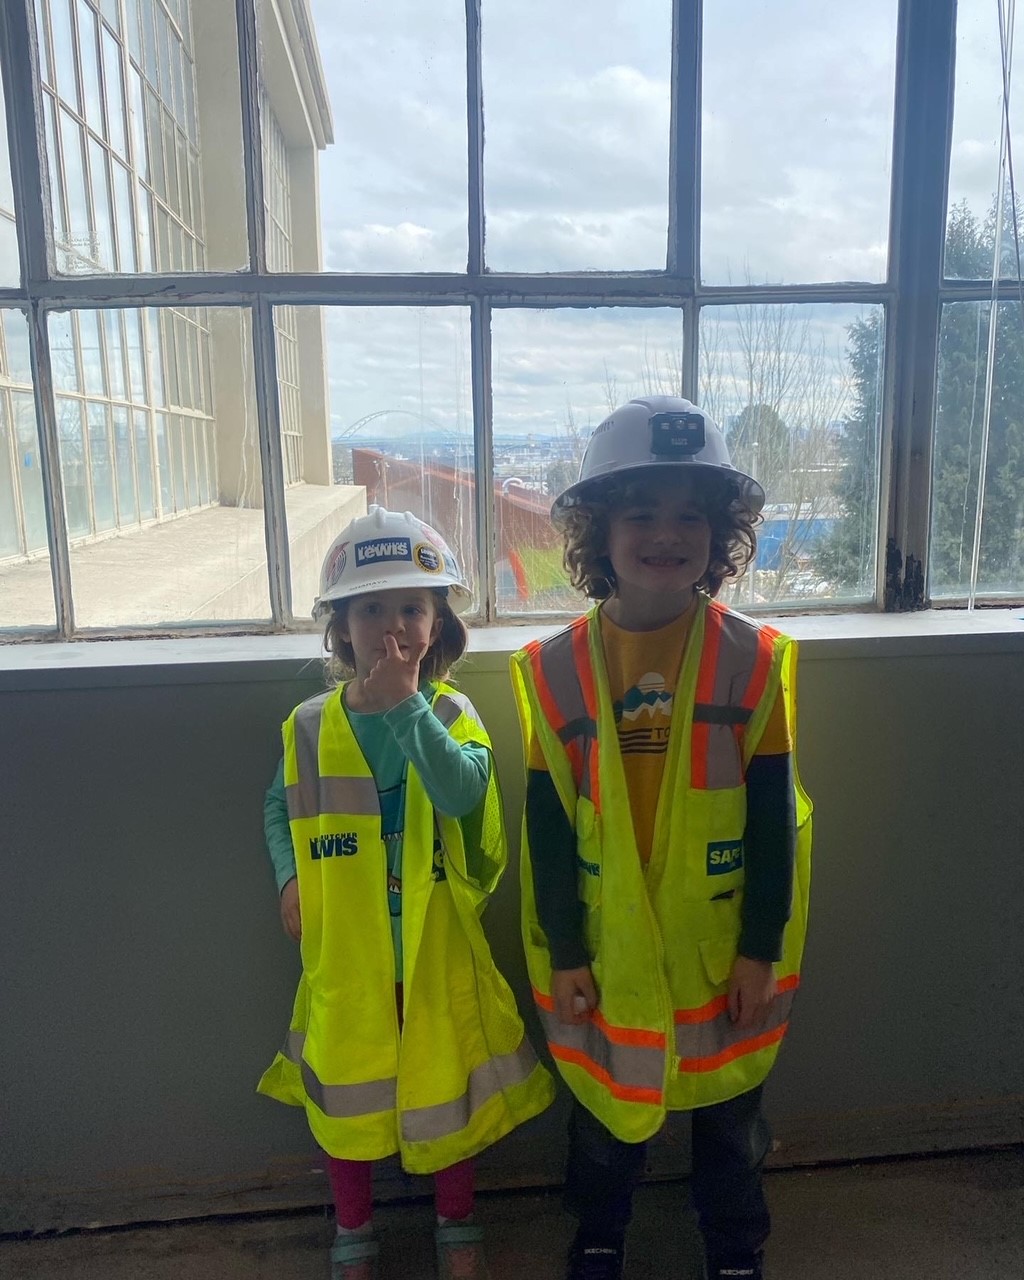 Sharaya’s children, Reagan and Asher, pose for a photo at Lewis’ Avangrid project.